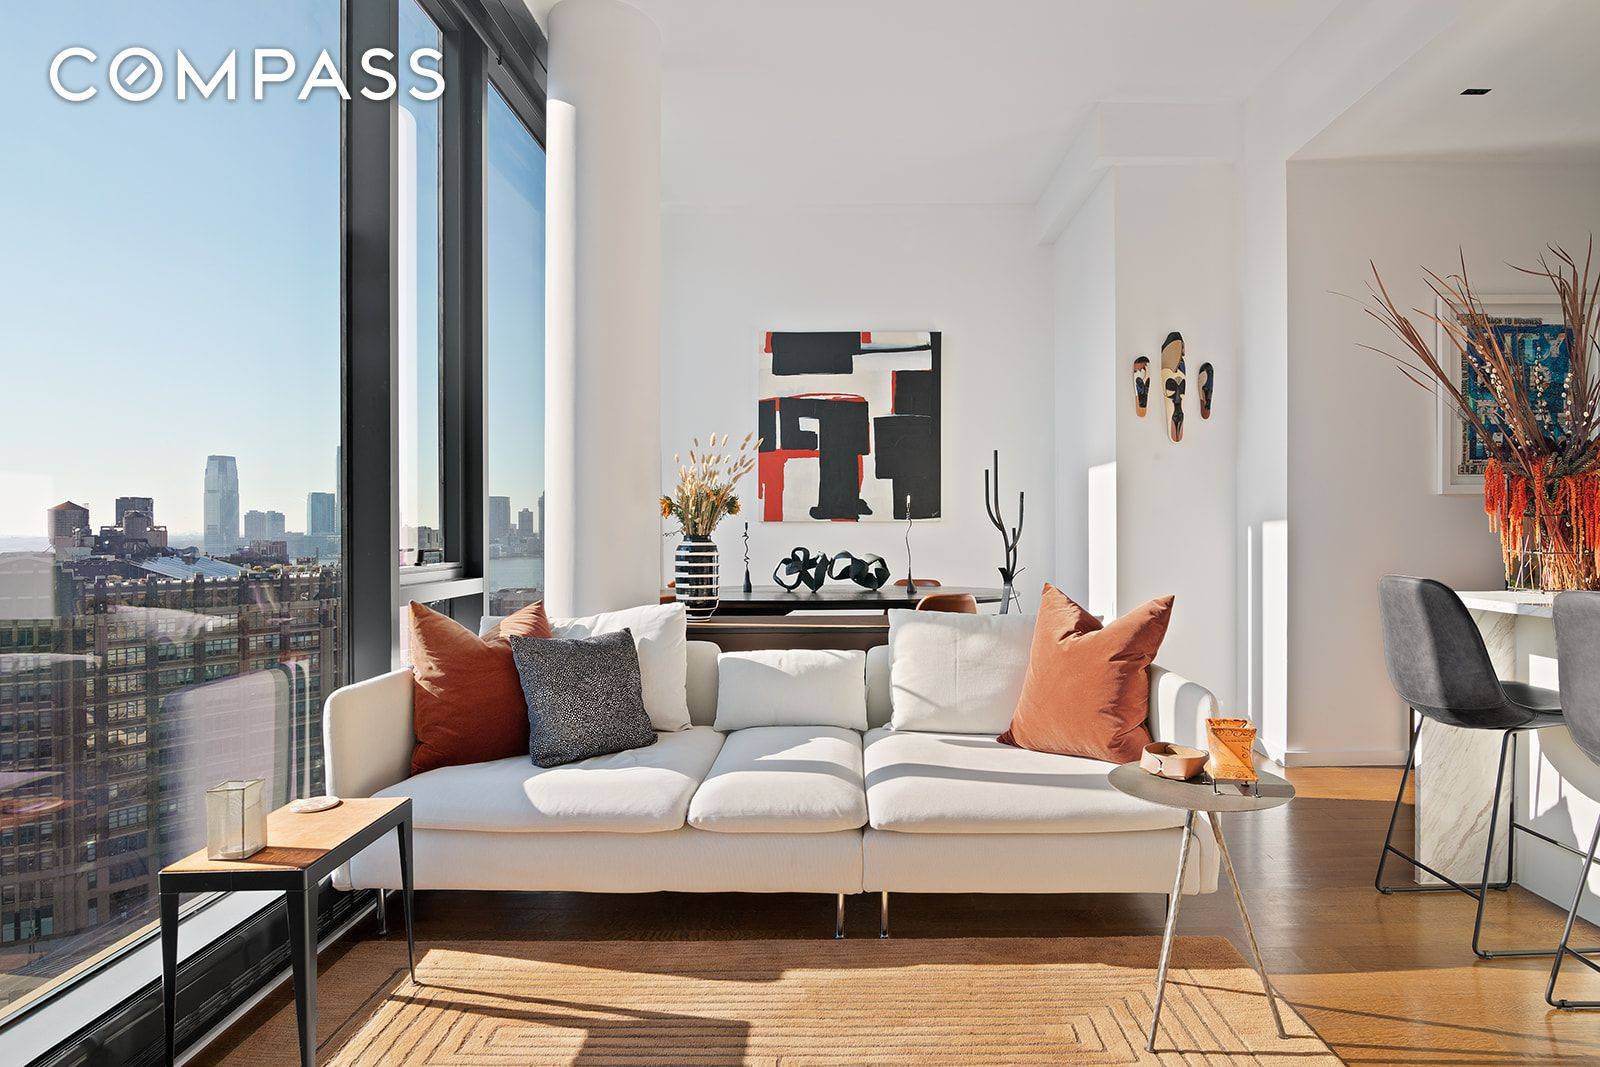 Embrace iconic skyline views and stunning designer interiors in this breathtaking, beautifully furnished two bedroom, two and a half bathroom residence nestled in Hudson Square's newest full service luxury condominium.